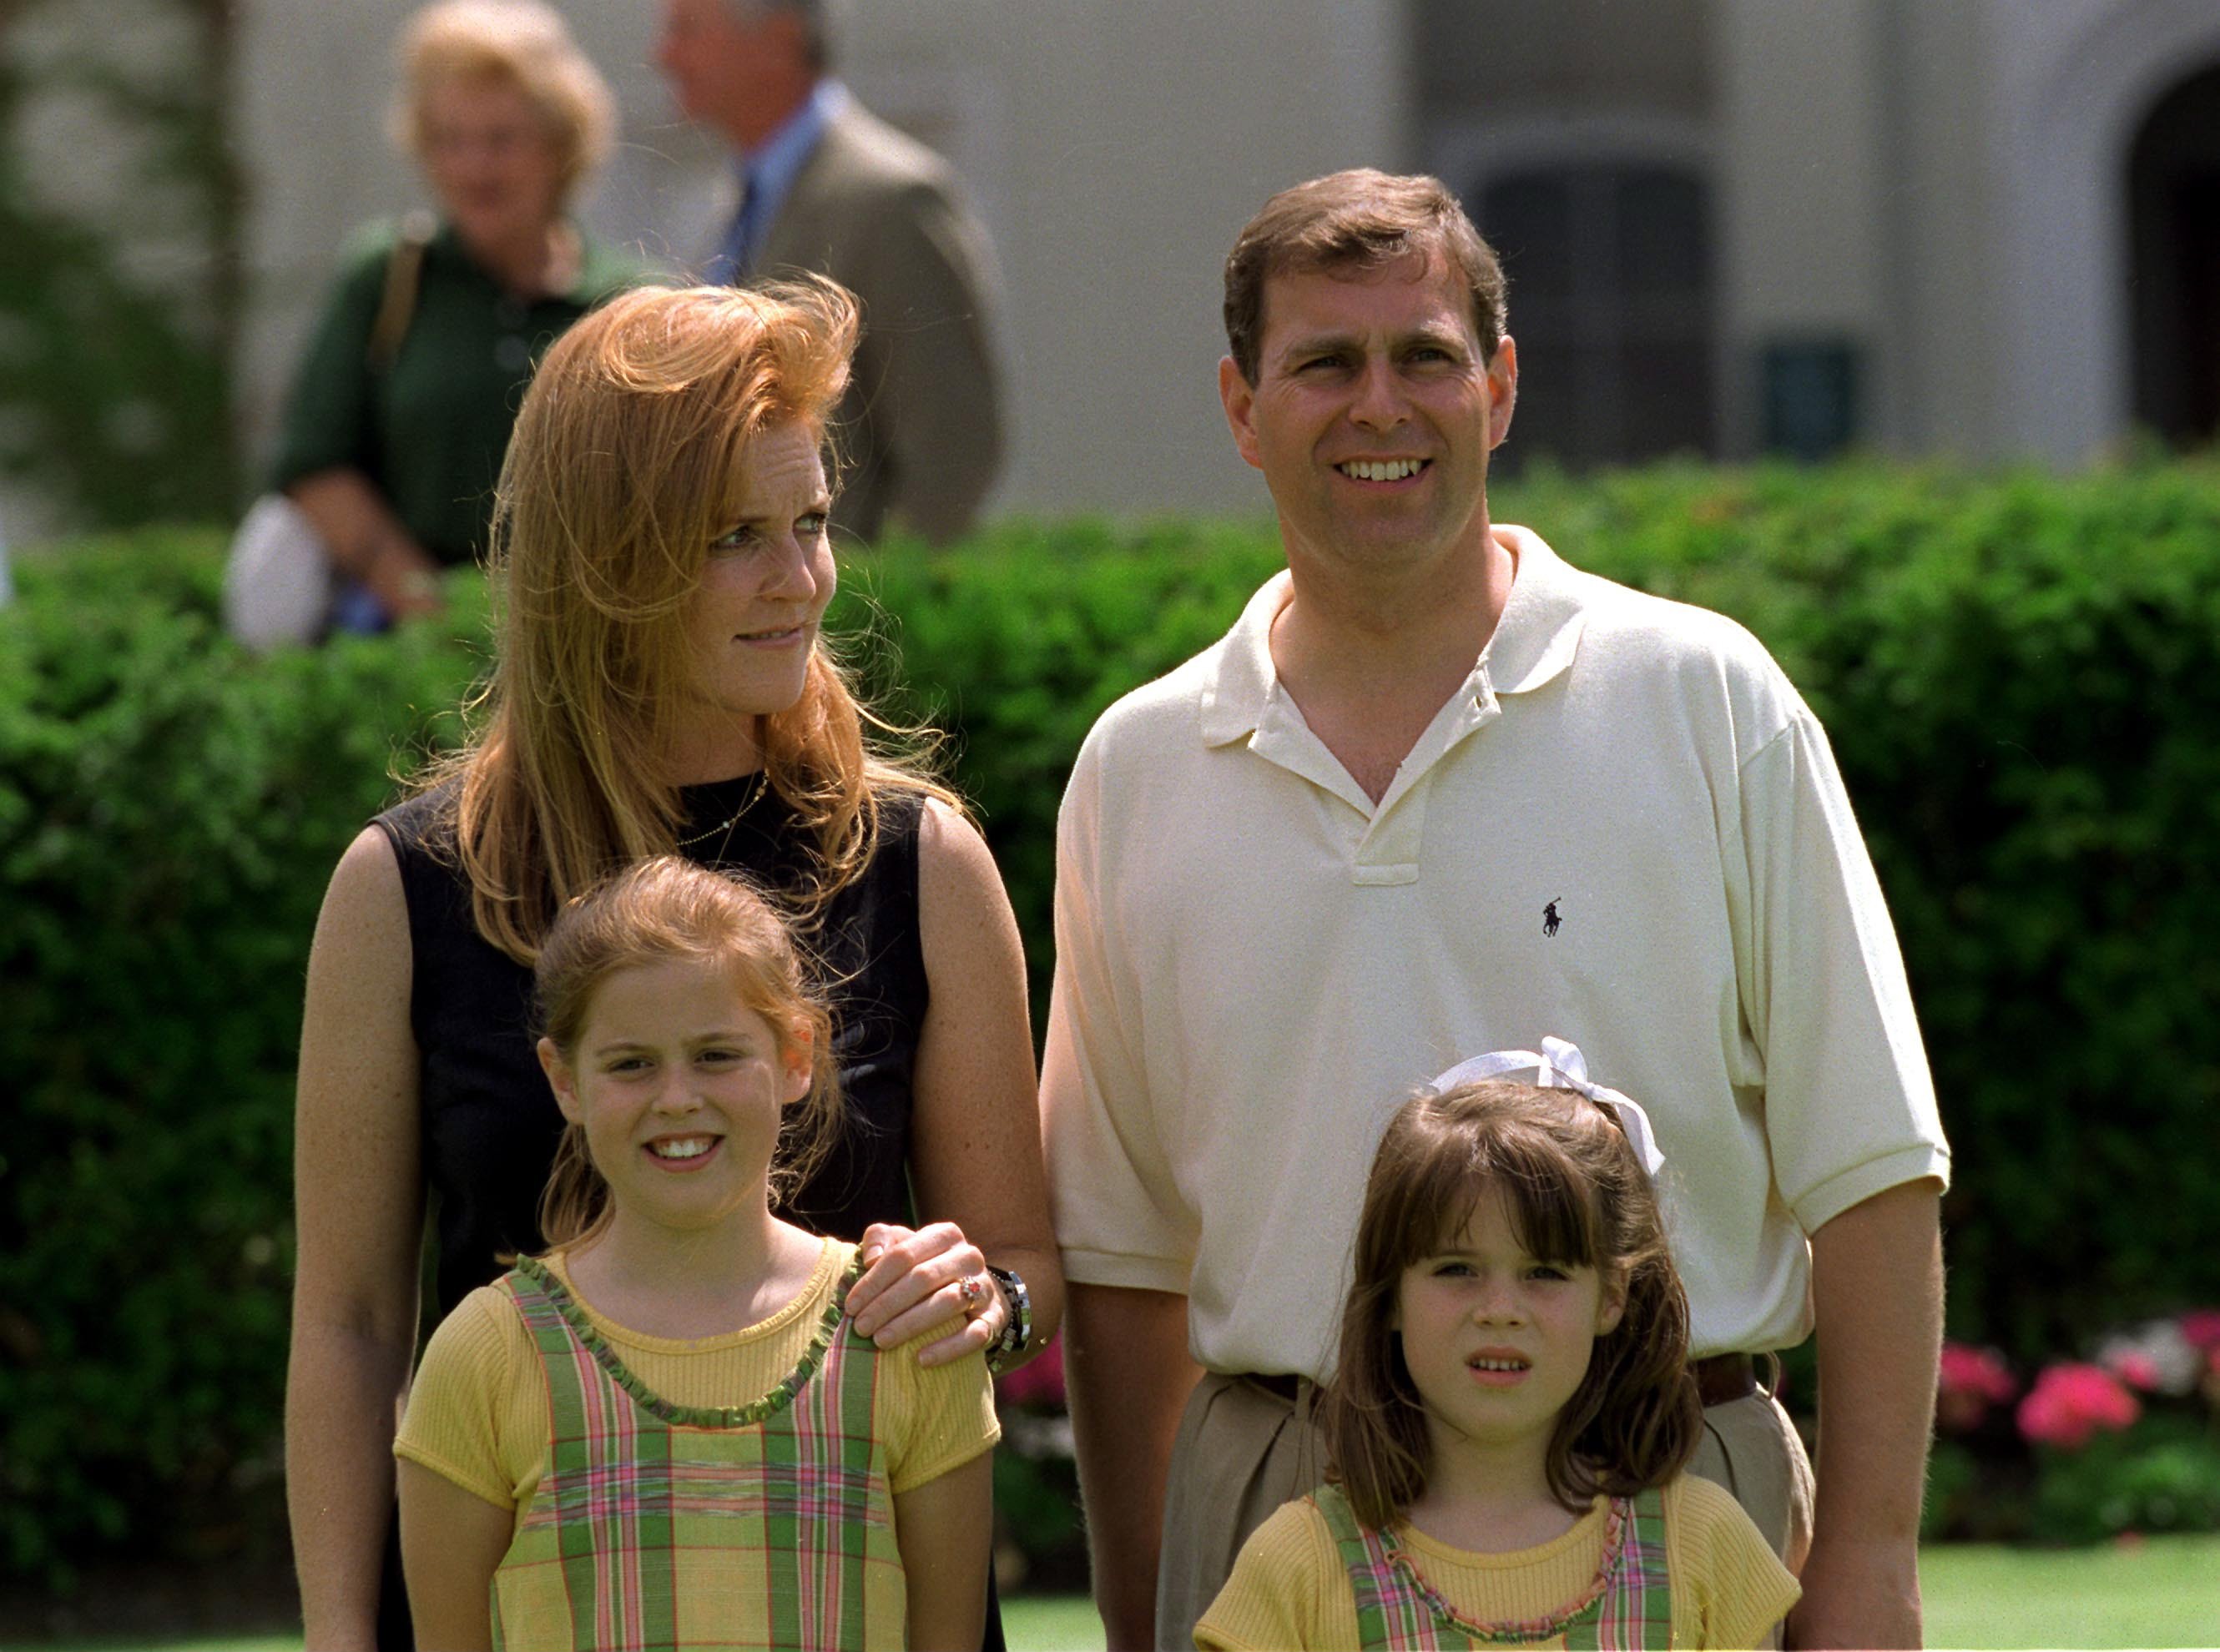  The Duke And Duchess Of York With Their Daughters, Princess Beatrice And Princess Eugenie, At Wentworth Golf Club For A Charity Golf Match In Aid Of Children In Crisis. | Source: Getty Images